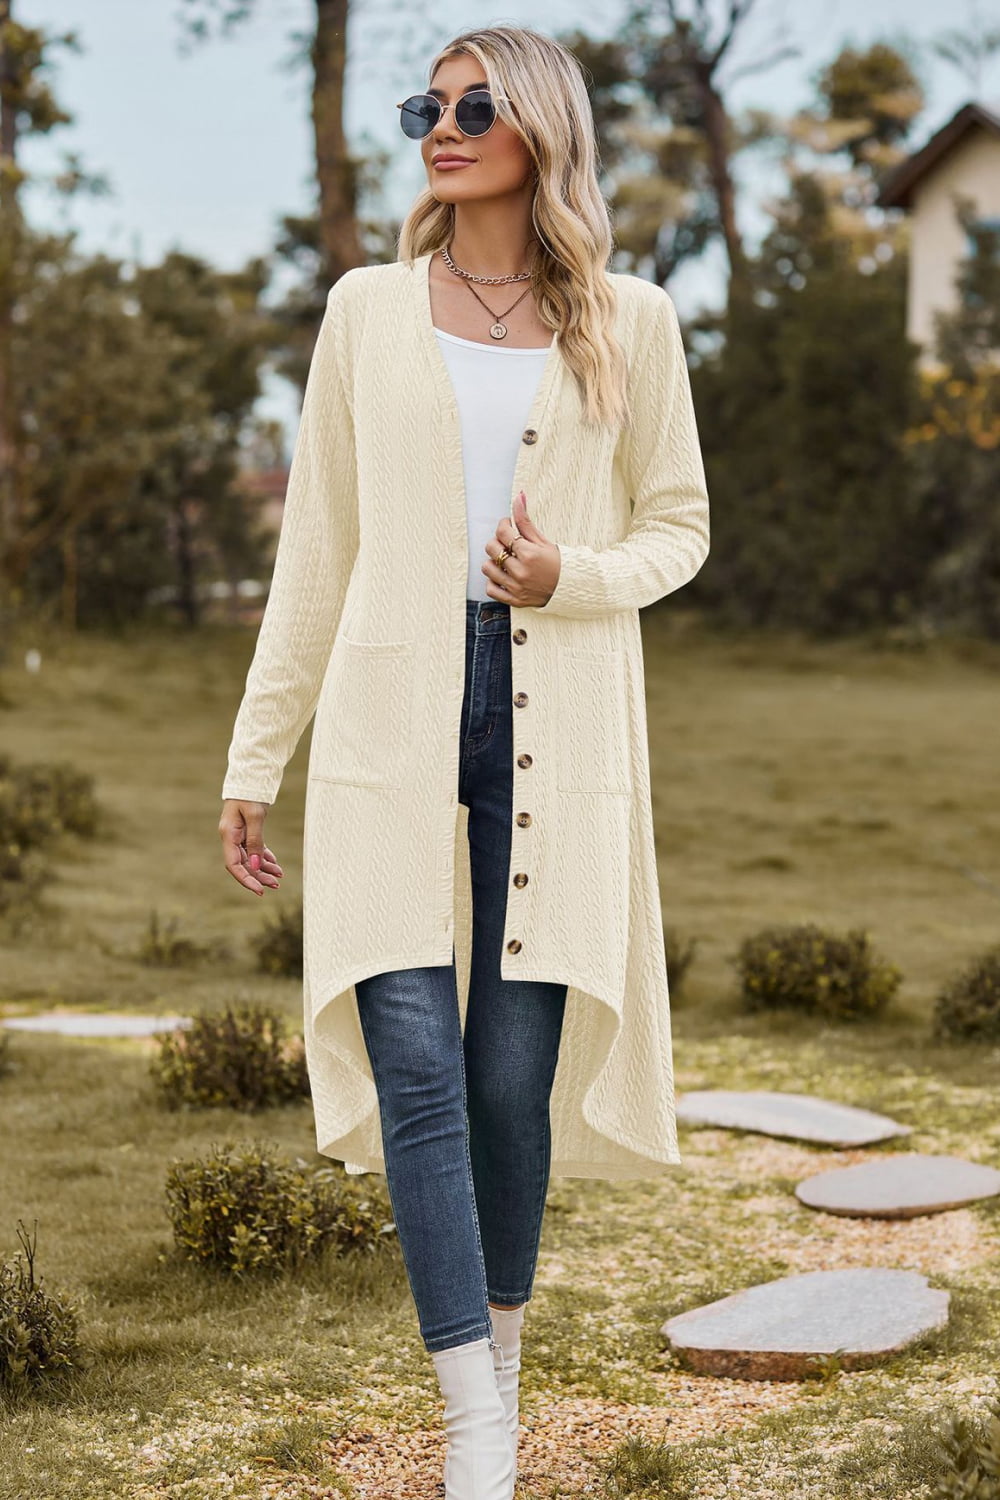 V-Neck Long Sleeve Cardigan with Pocket - Women’s Clothing & Accessories - Shirts & Tops - 11 - 2024